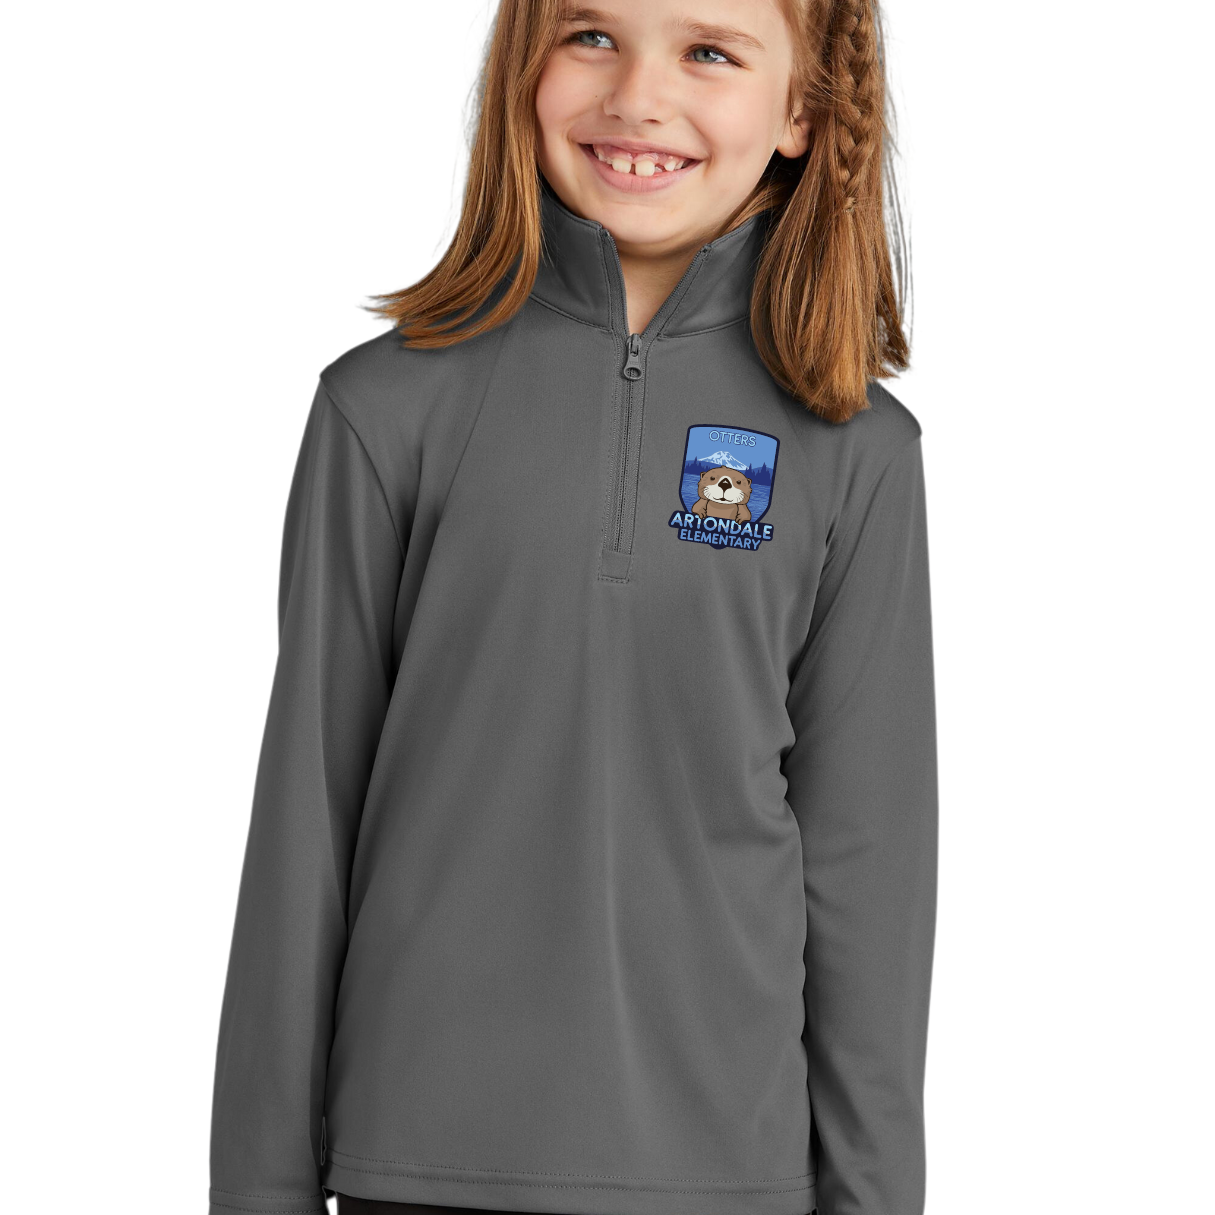 Otter Youth 1/4 Zip Pullover - Youth Sizes Only